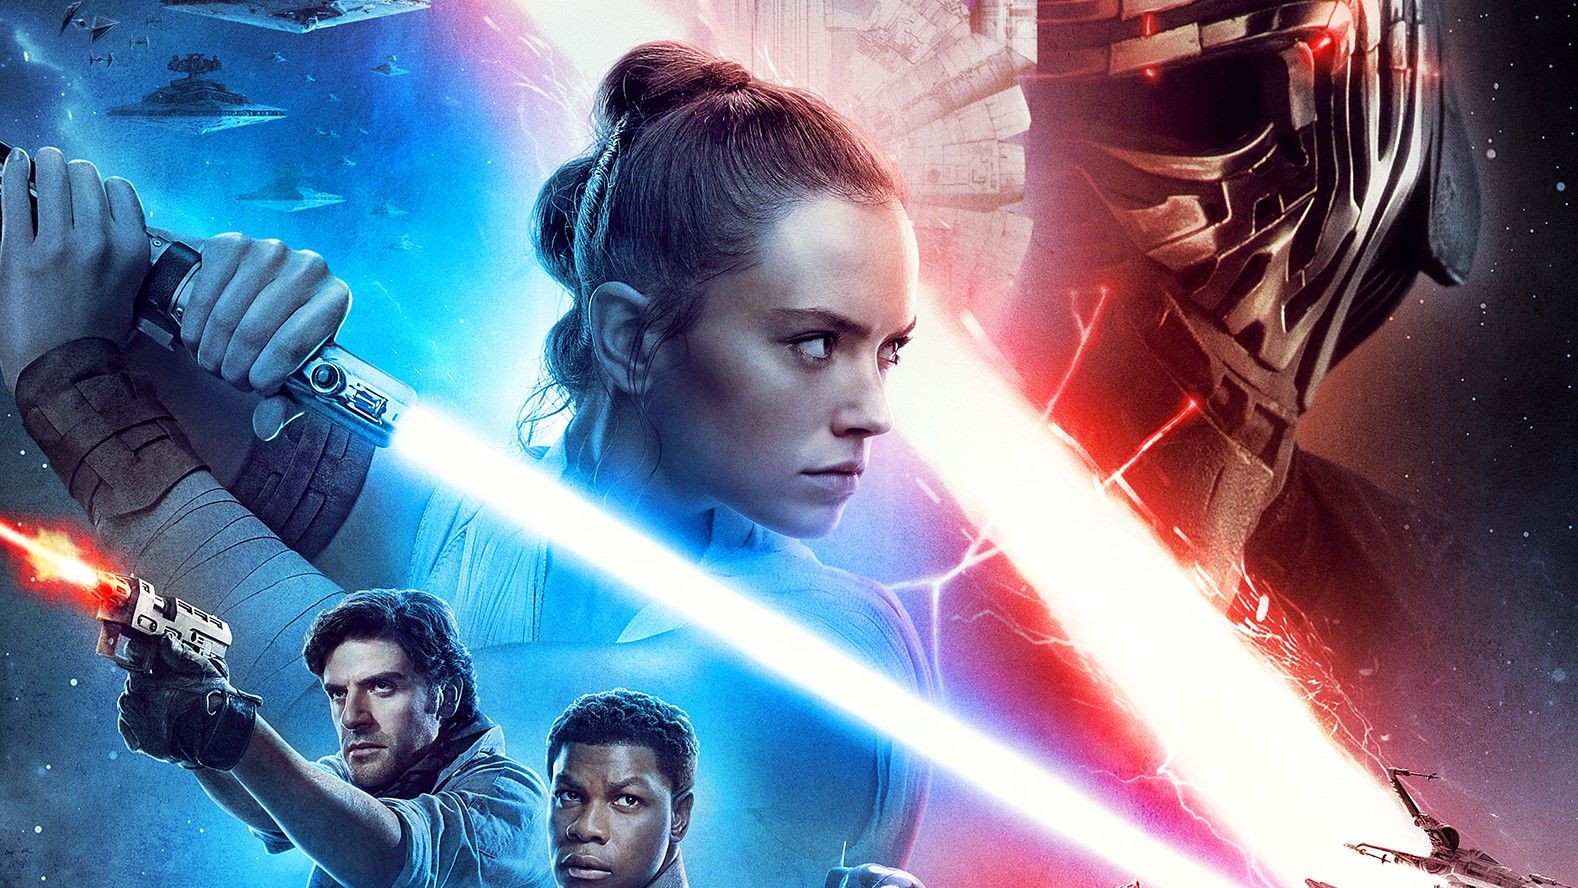 New Star Wars Posters Feature The Rise of Skywalker Lead Characters